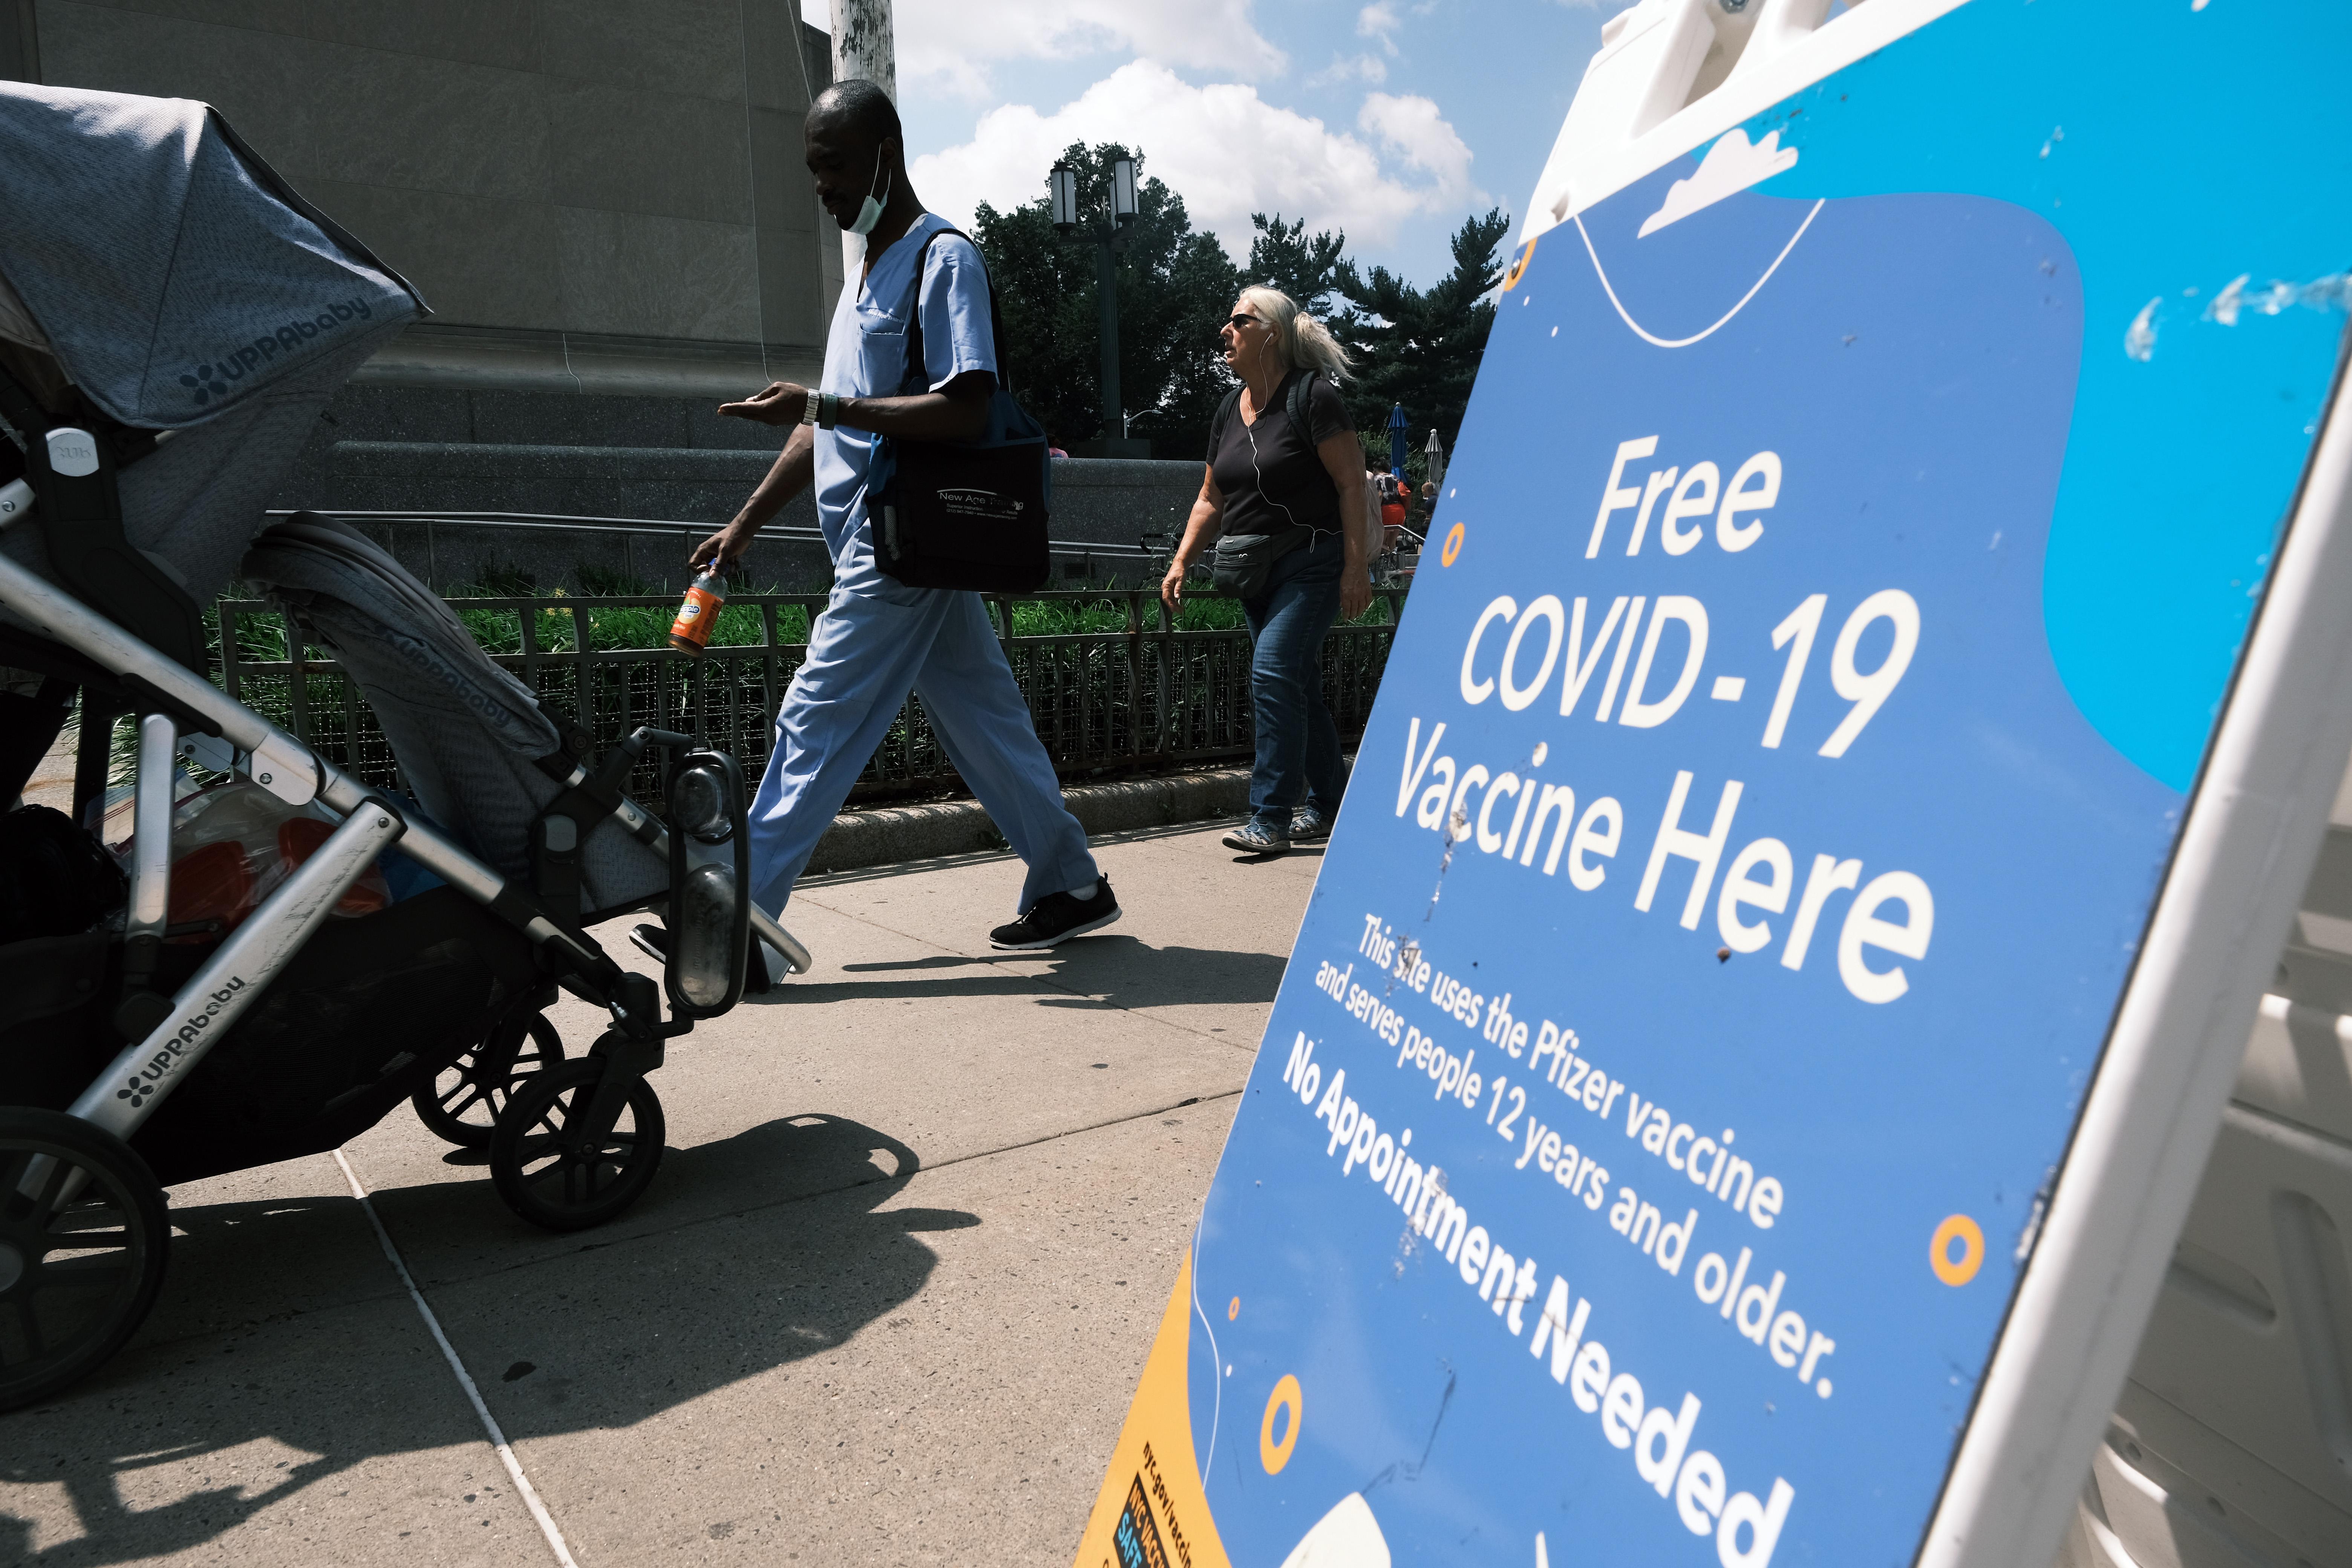 People walk by a sign that says "Free COVID-19 Vaccine Here."